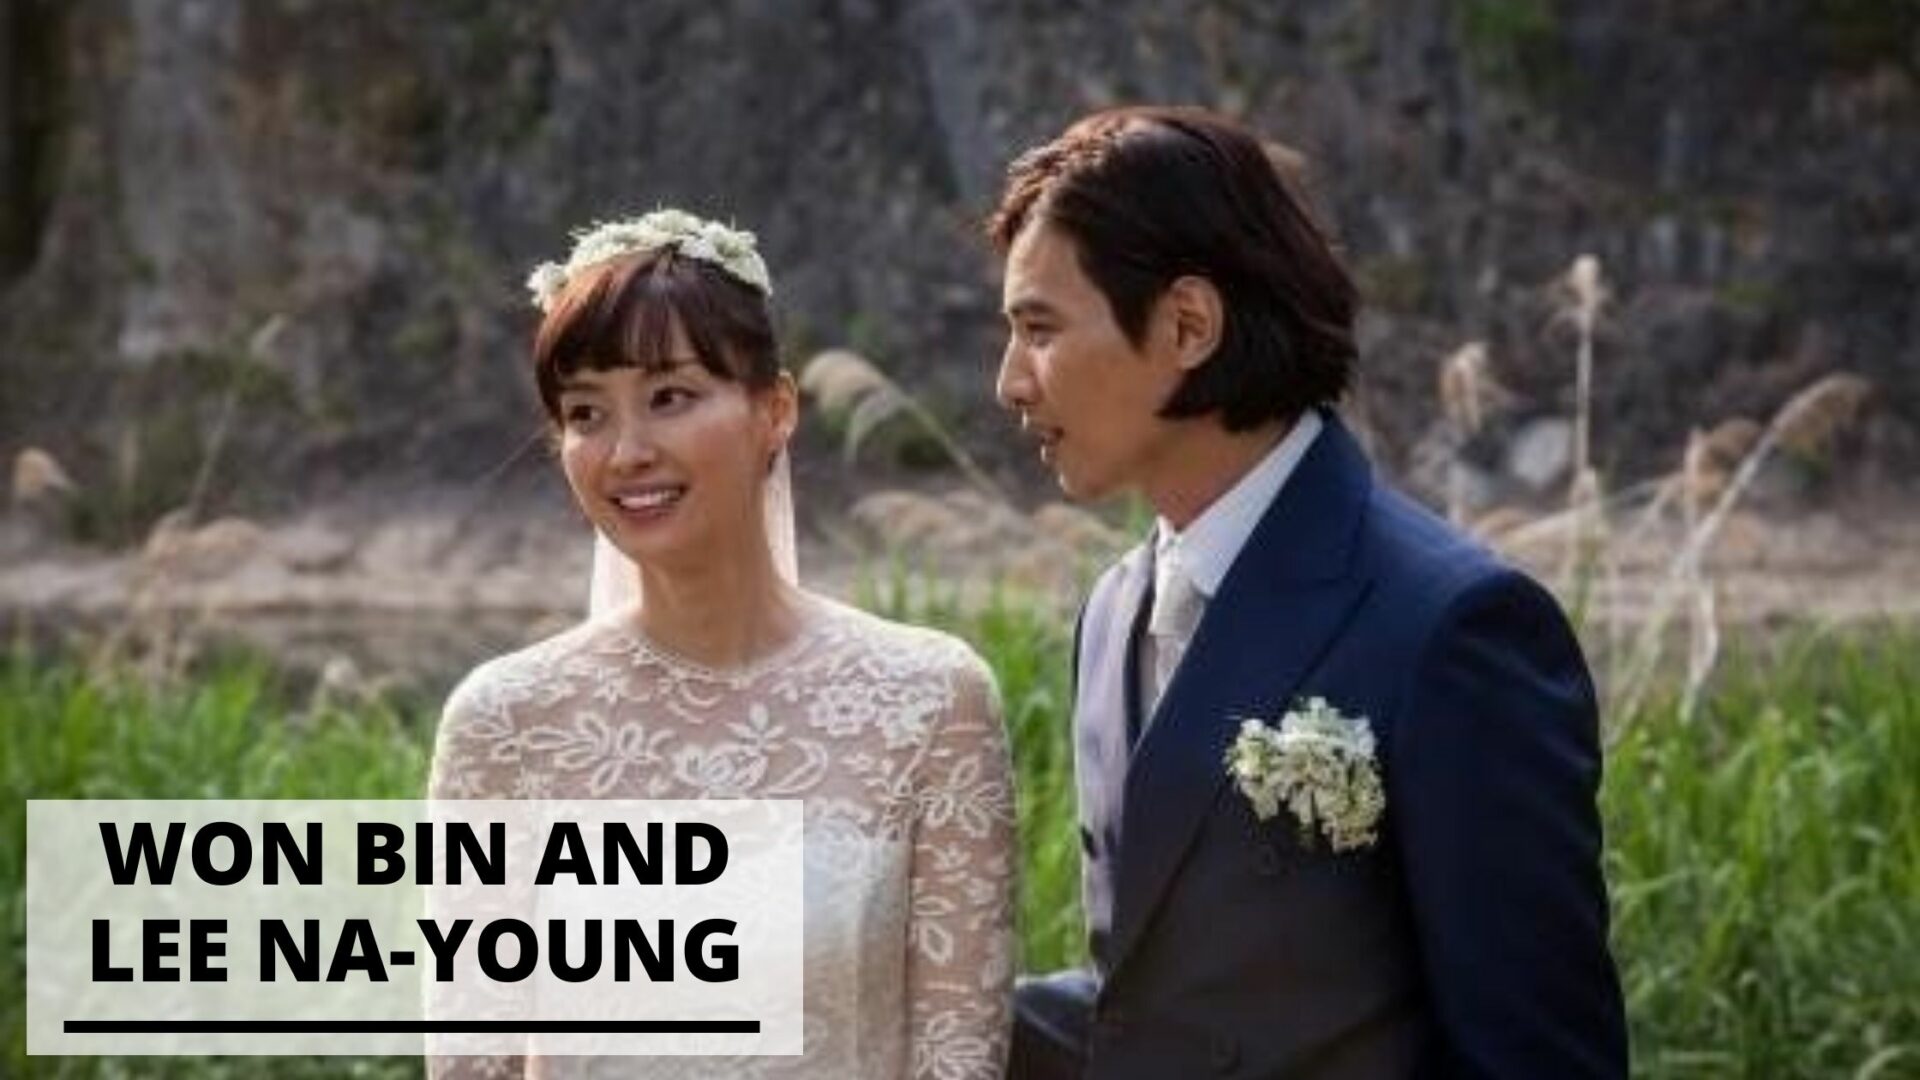 Info and Pics of Won Bin and Lee Na-young